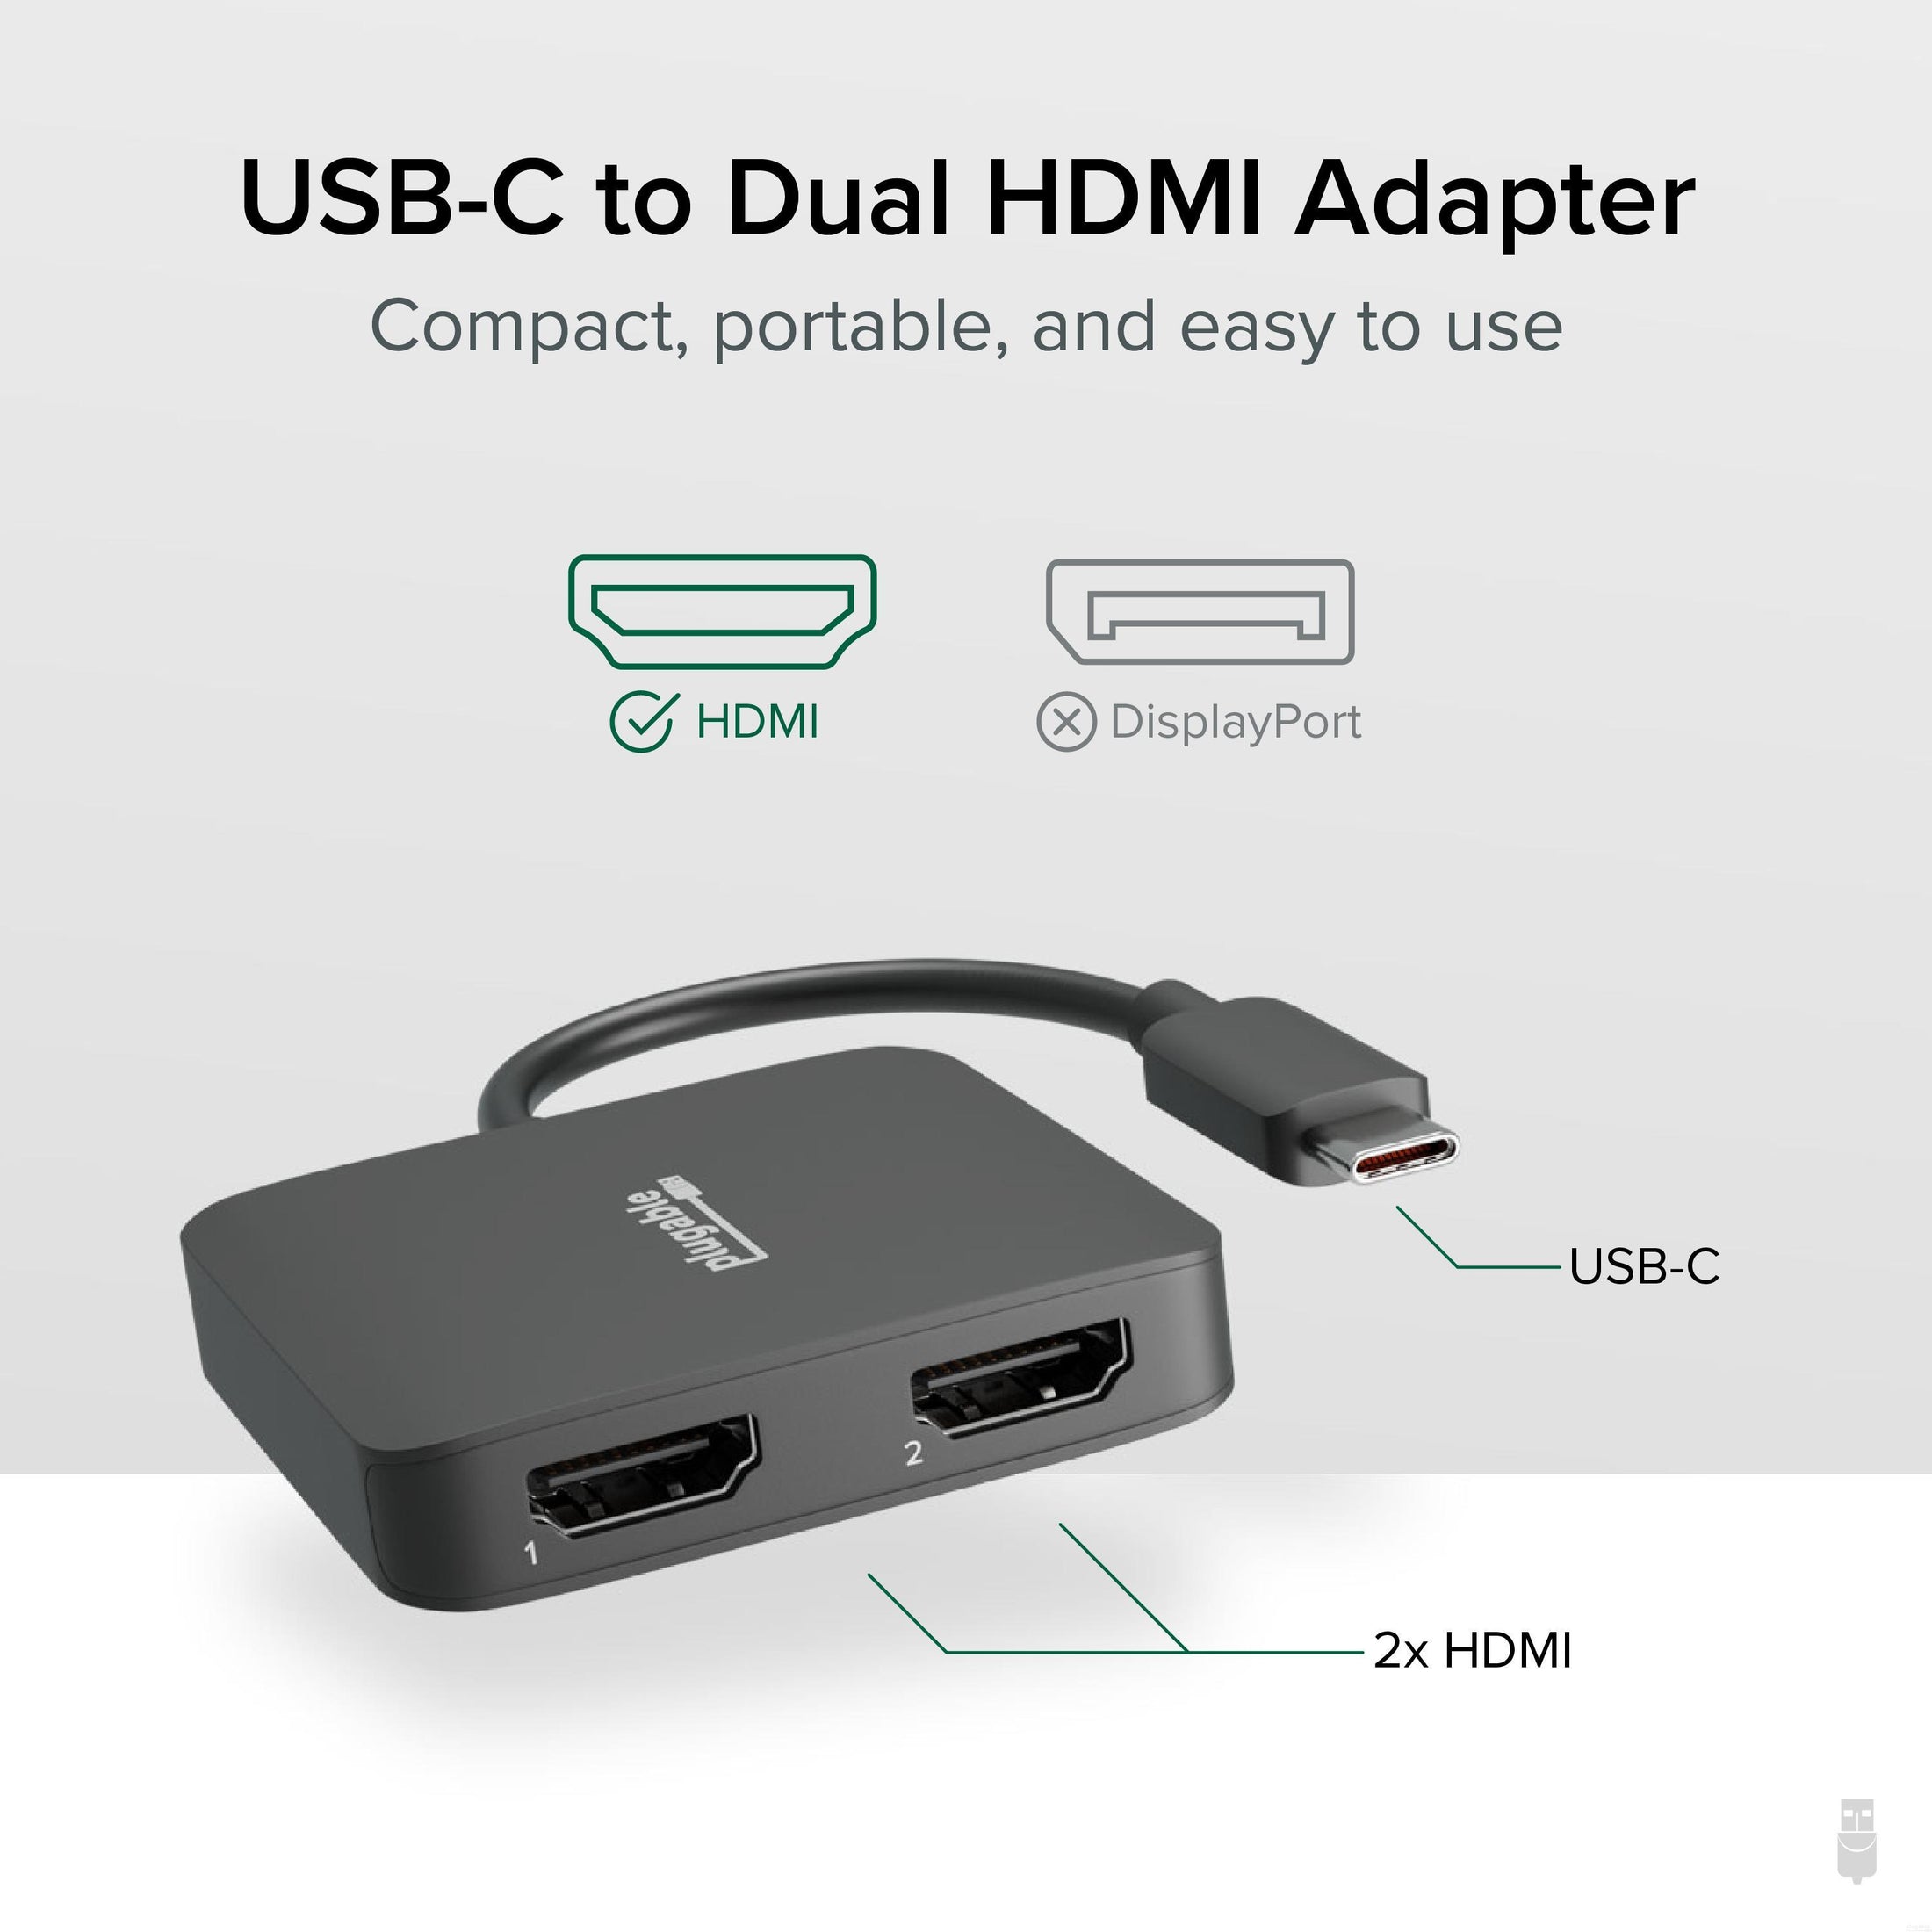 Plugable USB-C or USB 3.0 to HDMI Adapter